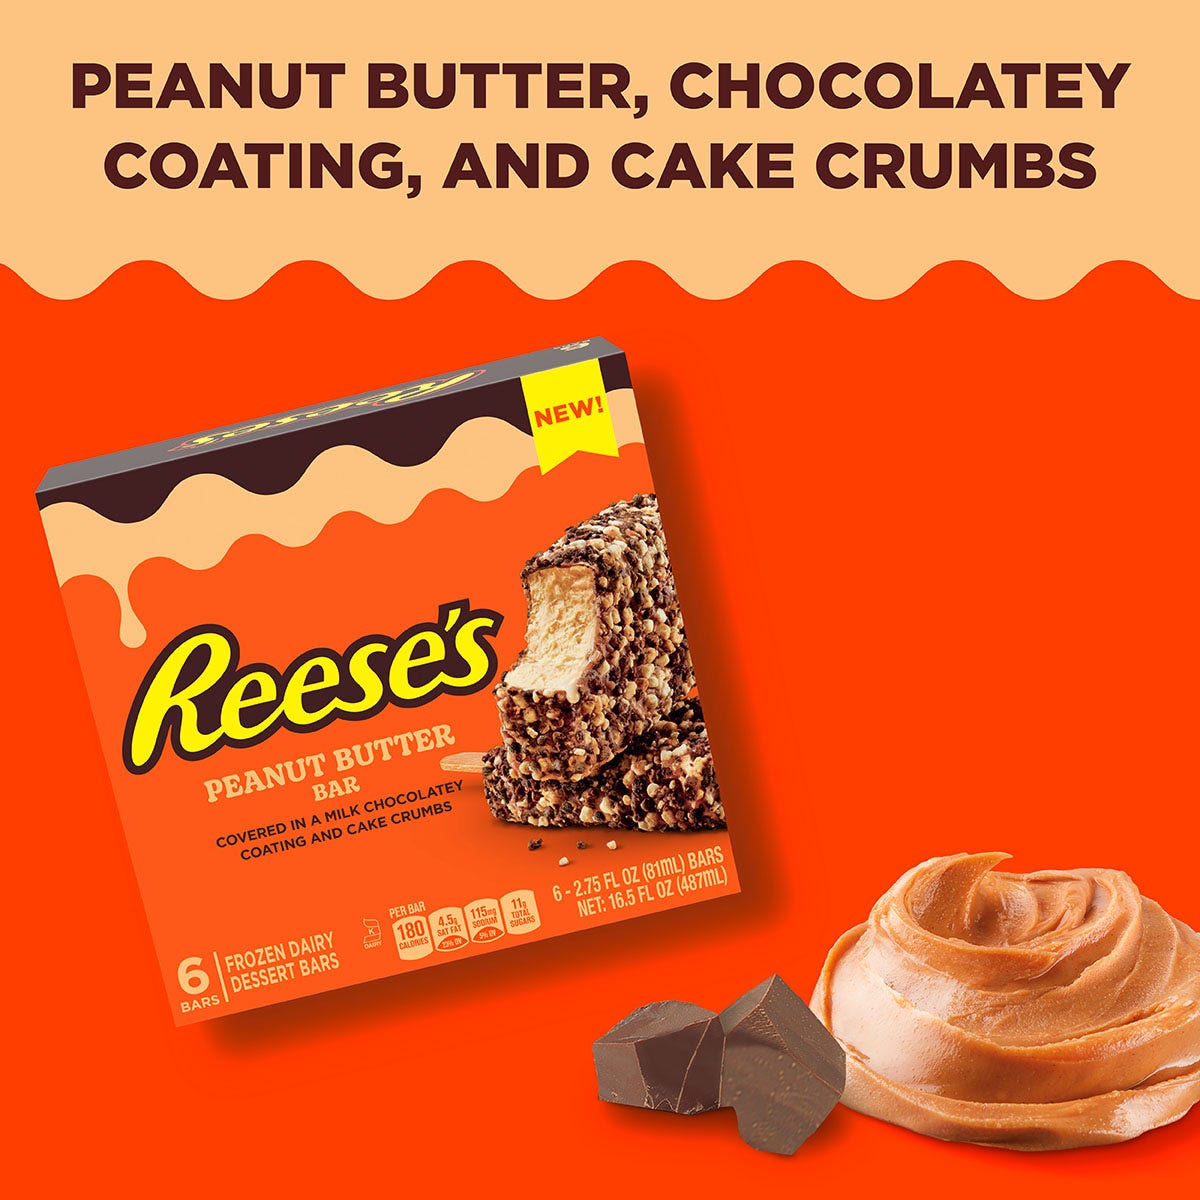 REESE'S Peanut Butter Frozen Dairy Dessert Bar, 2.75 oz, 6 count box - Front of Package